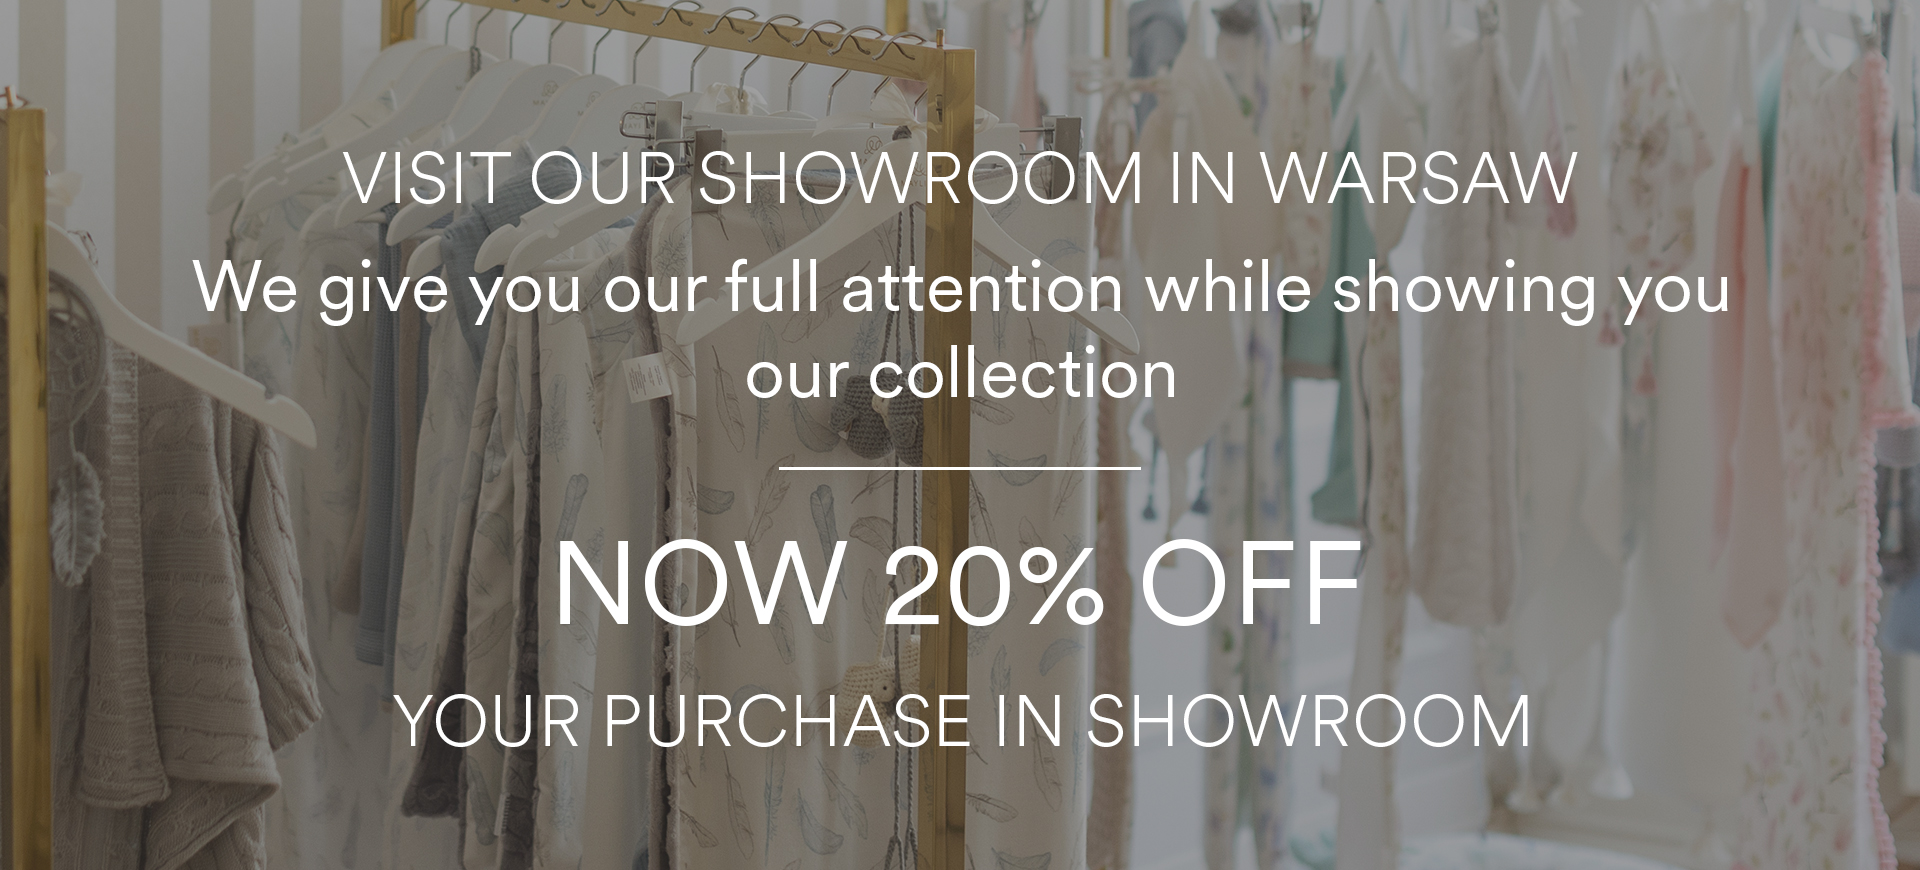 Visit our showroom in Warsaw - Now 20% off your purchase in showroom